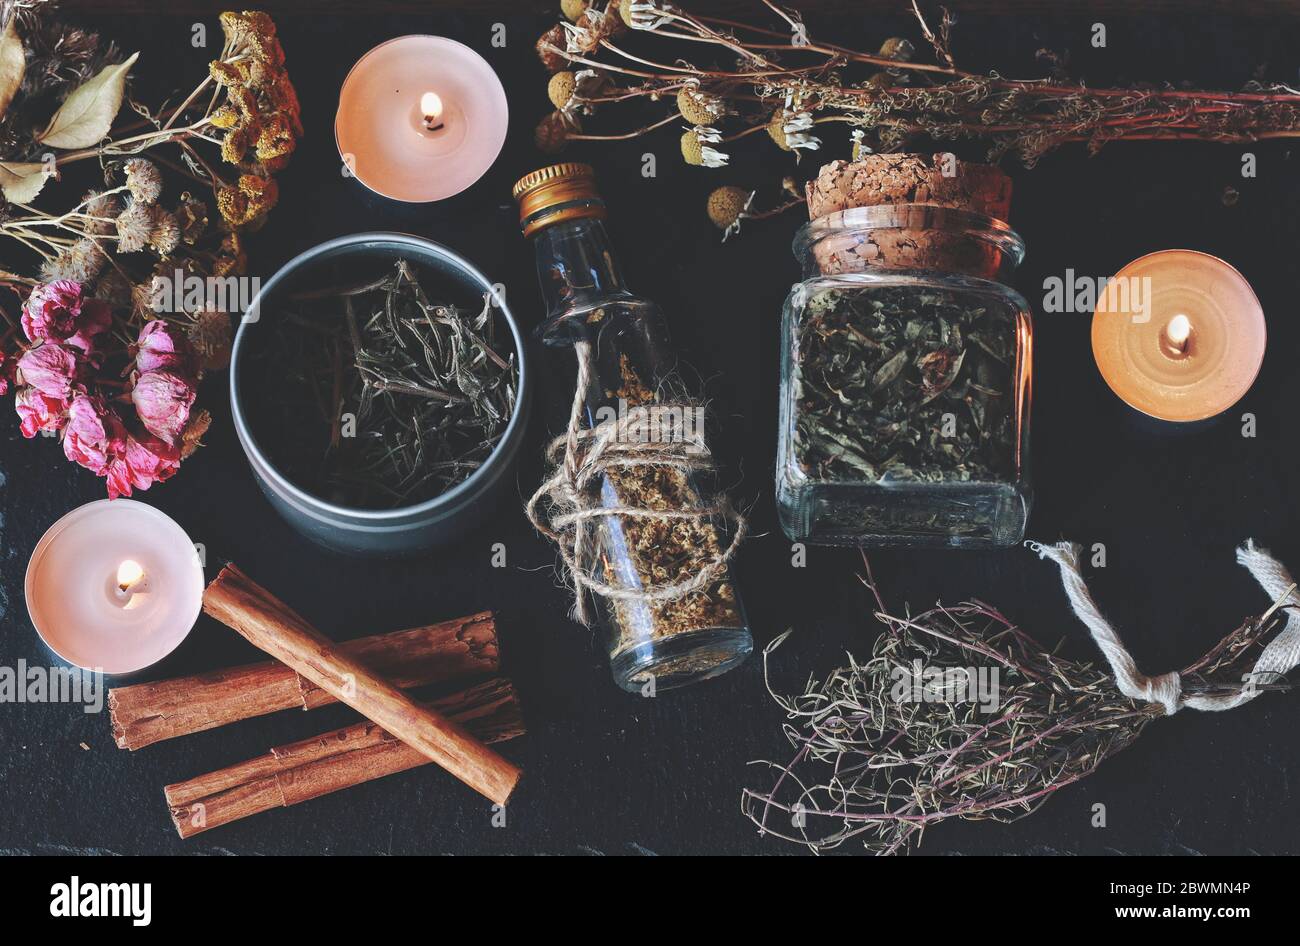 Flat lay of kitchen witchery using herbs and spices found at home. Herbal magick in wicca and witchcraft. Glass jars filled with dried herbs and spice Stock Photo